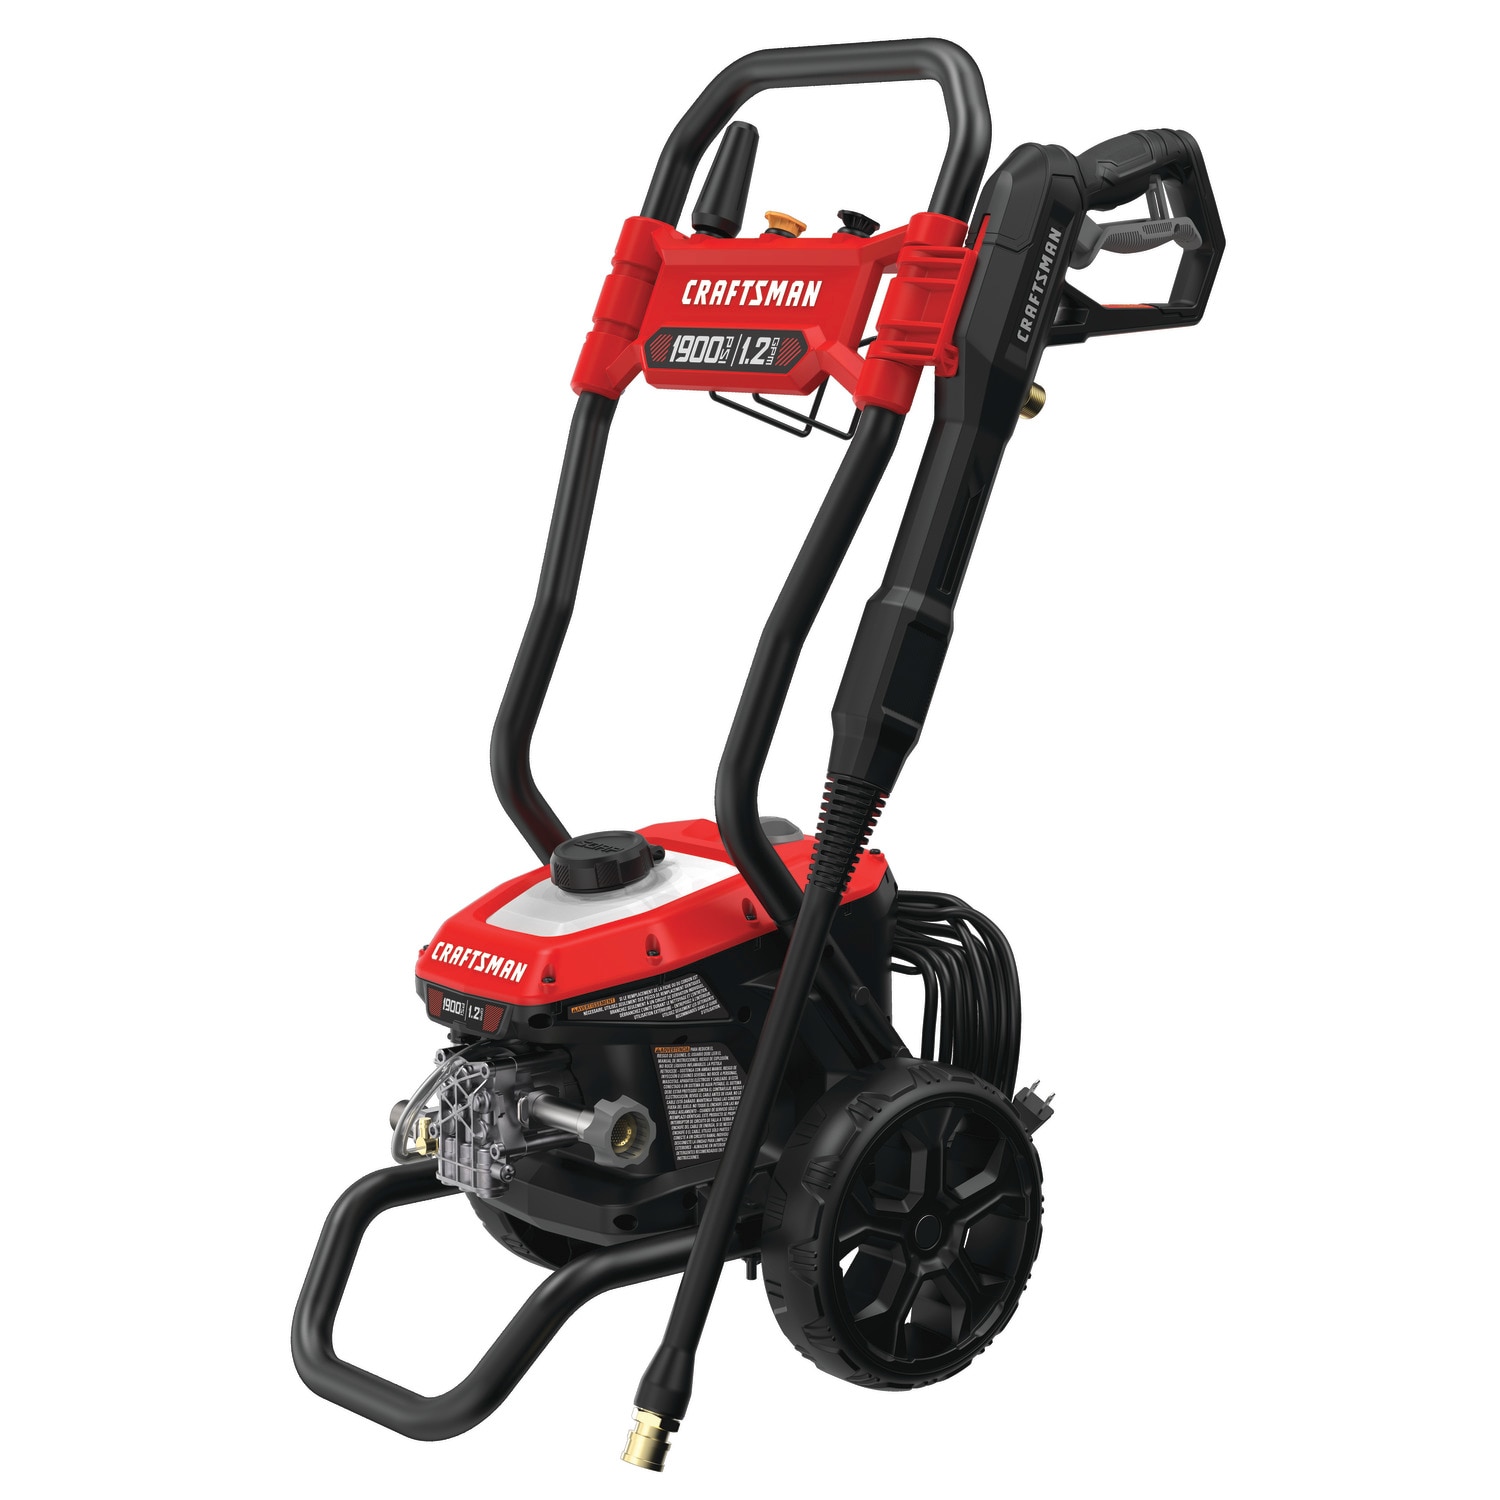 Craftsman 020535 2000 PSI Clean N' Carry Gas - Cold Water Pressure Washer